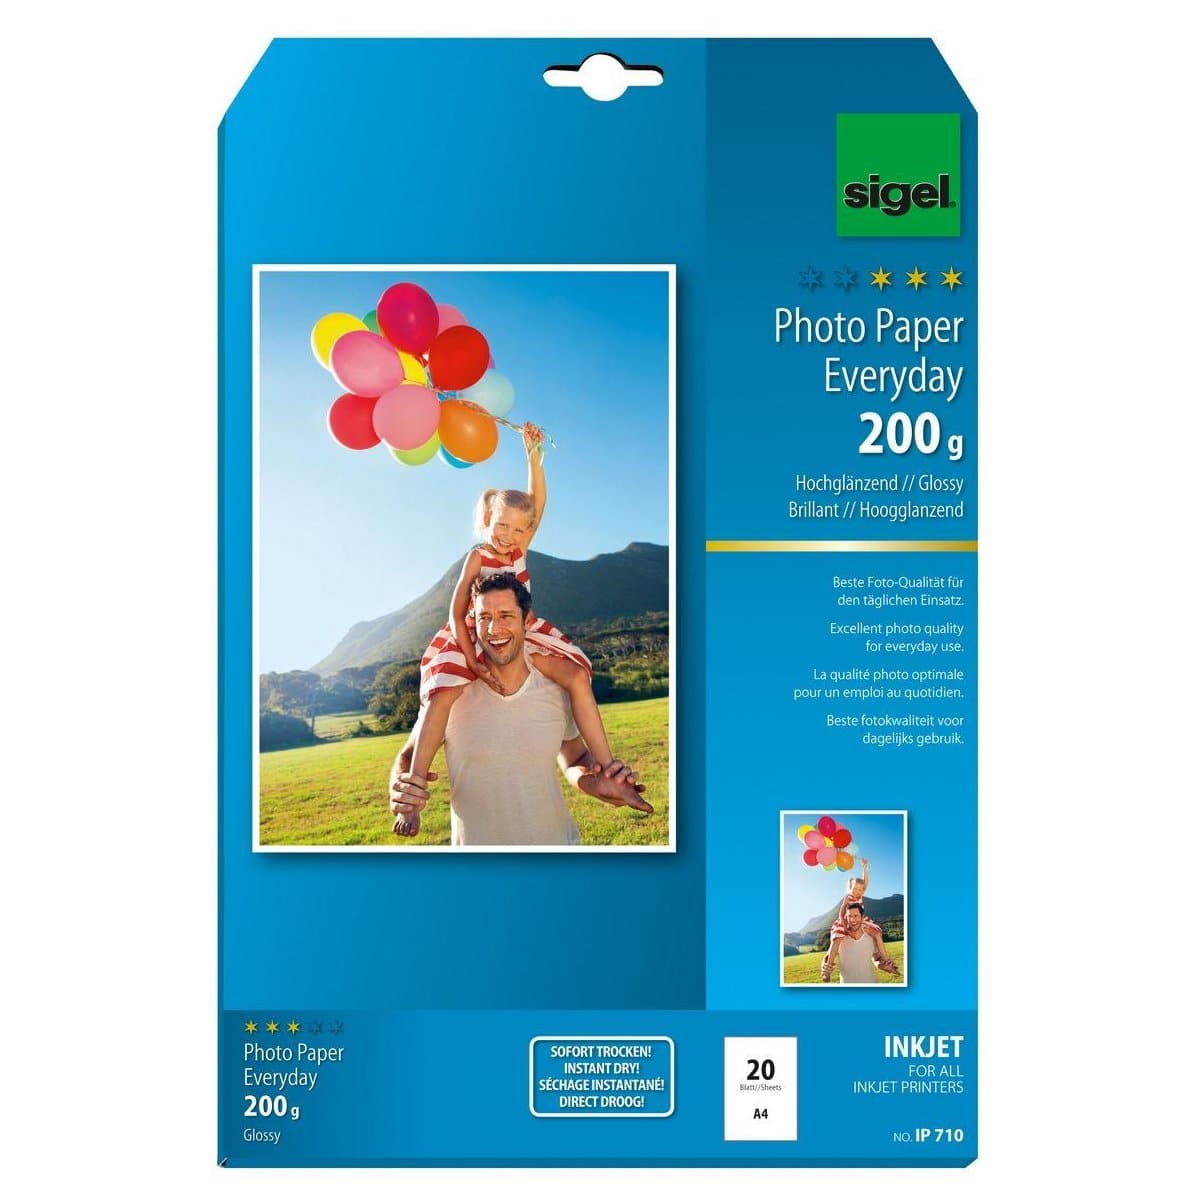 Sigel InkJet Everyday plus Photo Paper, A4, 200 gsm, 20 sheets, Glossy White